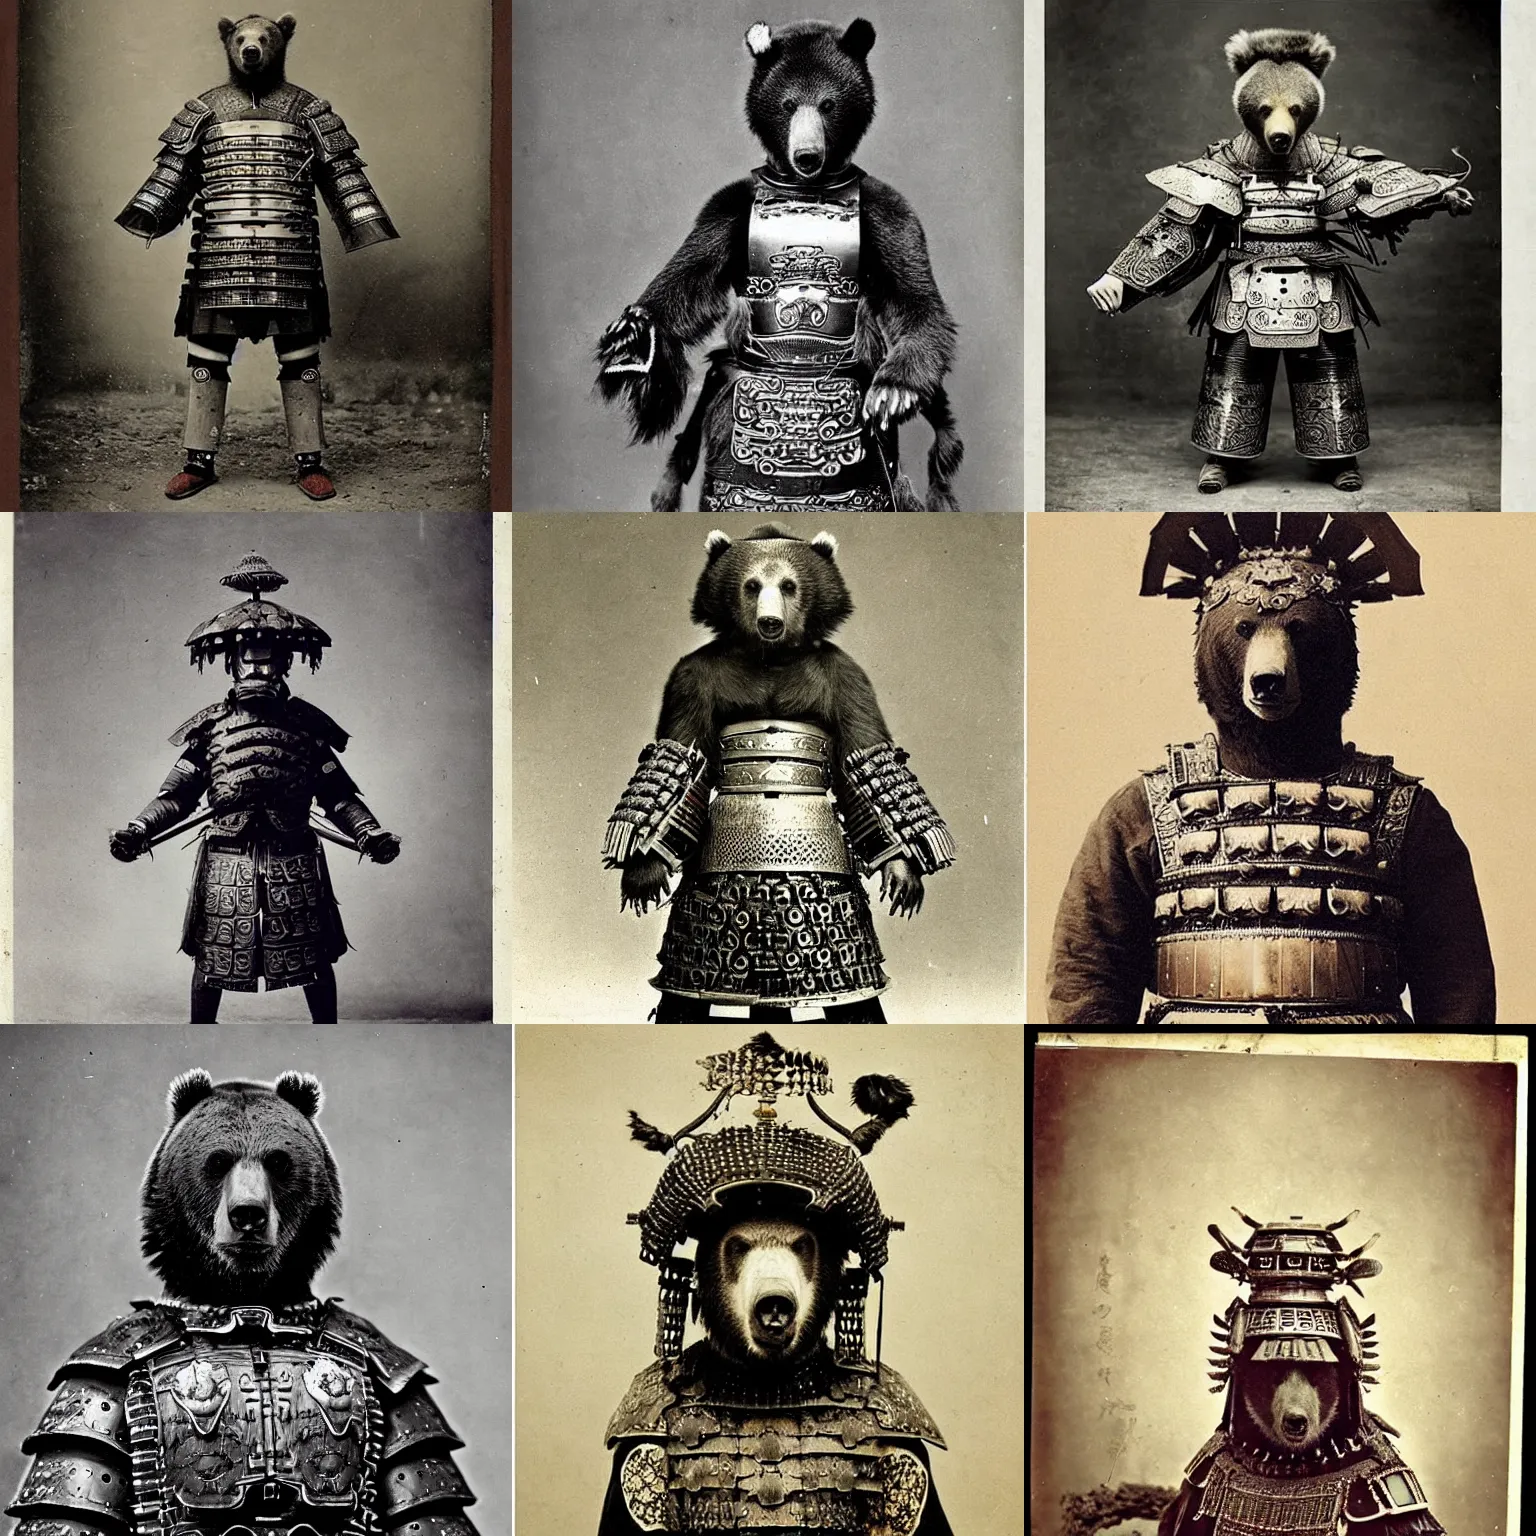 Image similar to “grizzly bear in full ornate samurai armour, 1900’s photo”